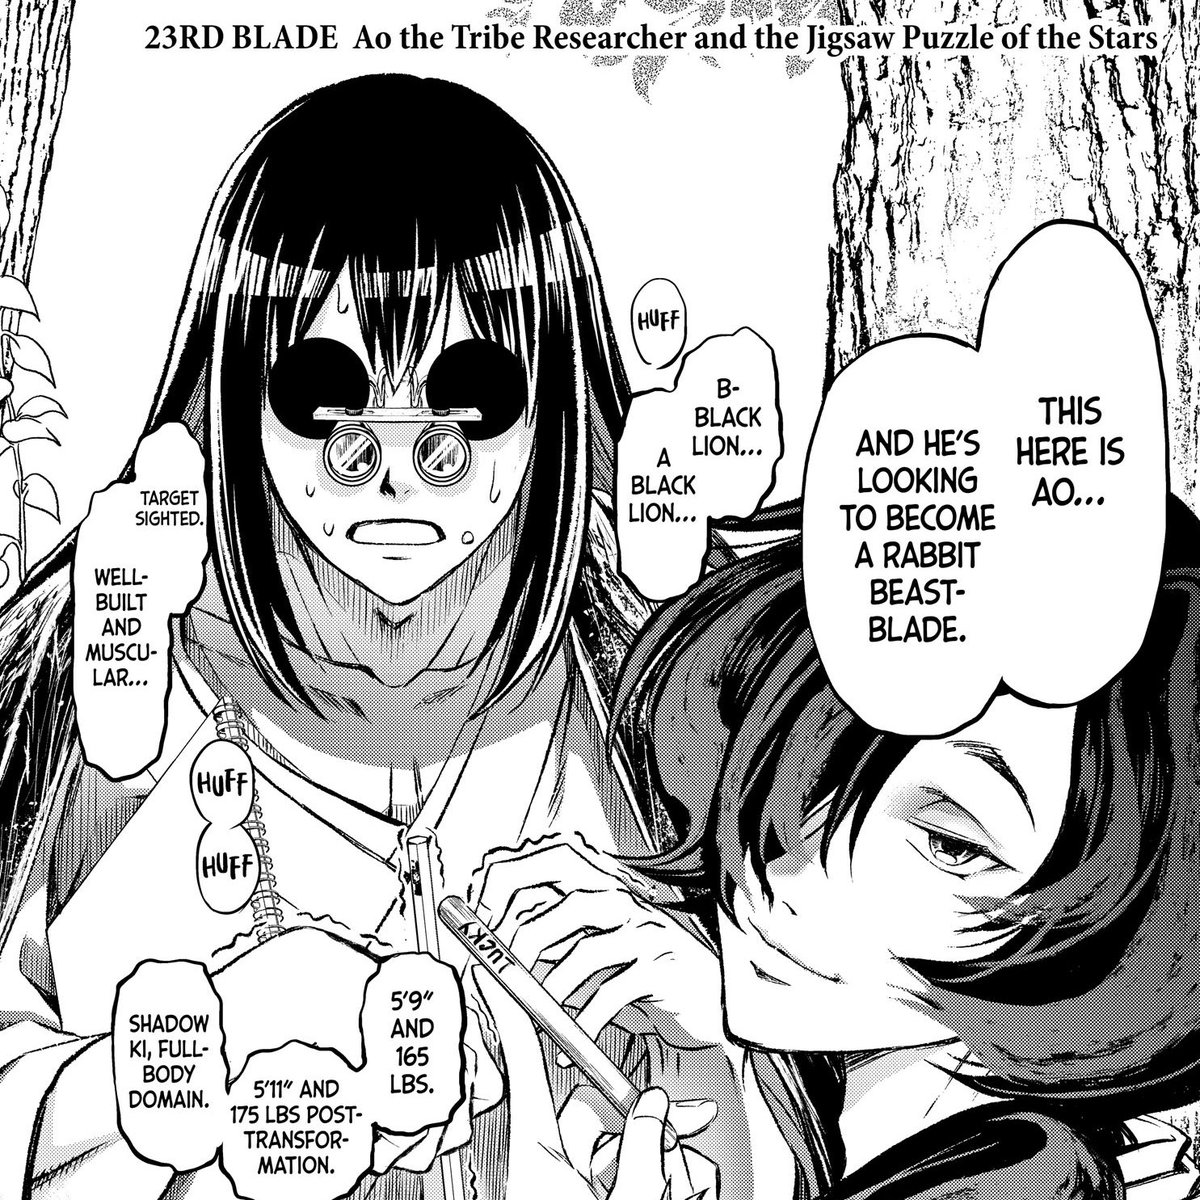 KATANA Beast, Chapter 23: Kotori introduces a new Beastblade to the Rabbits! Will Hijimaru accept him into the pack? Find out!

🧩23RD BLADE Ao the Tribe Researcher and the Jigsaw Puzzle of the Stars
Read now: s.kmanga.kodansha.com/ldg?t=10571&e=…

#KATANABeast
#獣心のカタナ